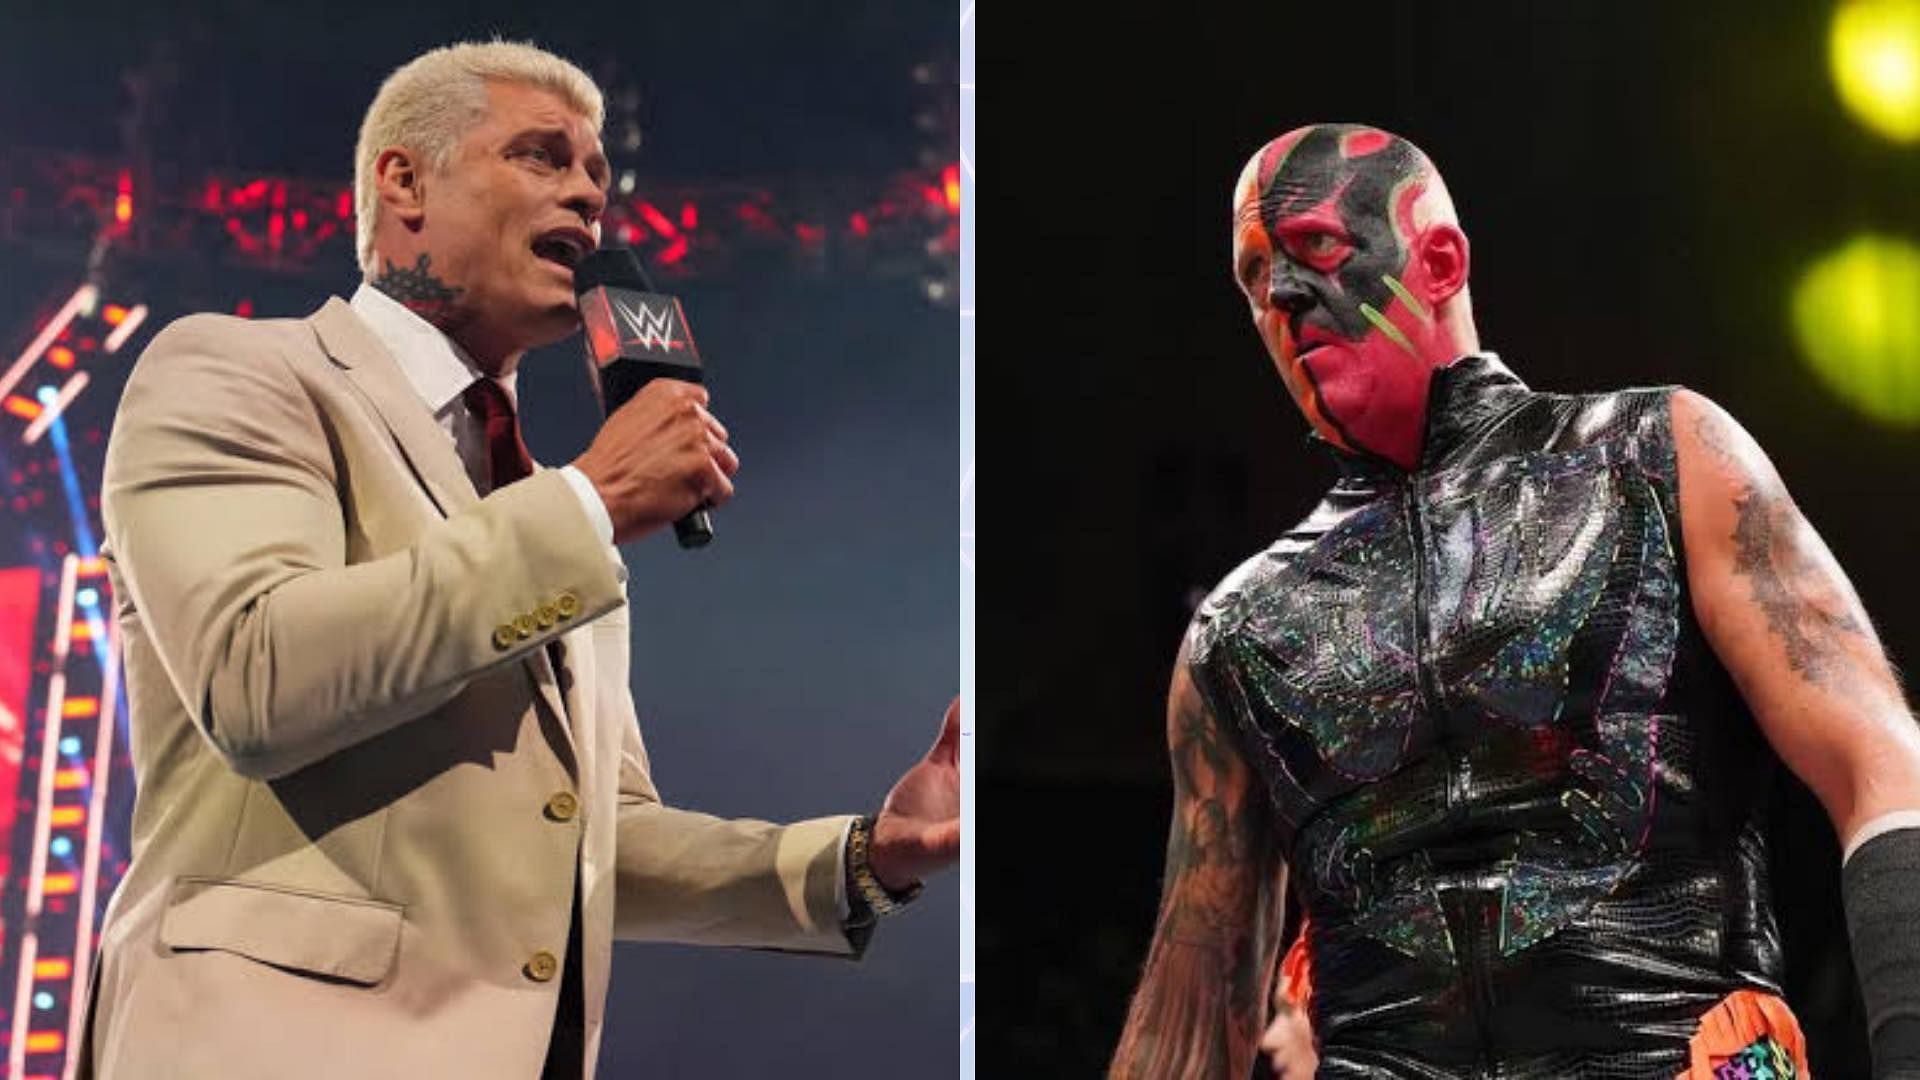 Dustin and Cody Rhodes faced each other for the last time at the inaugural AEW Double or Nothing event